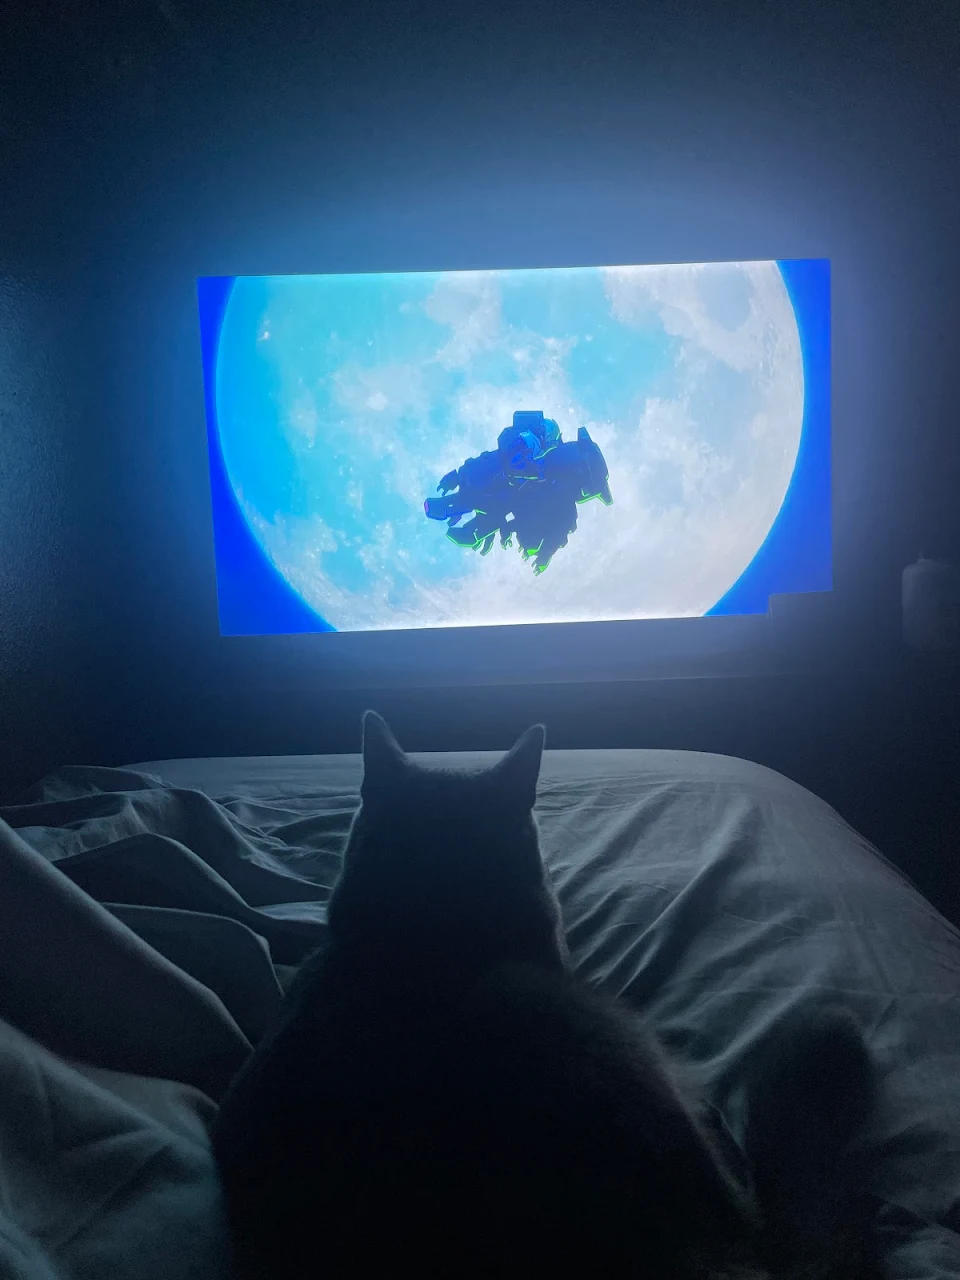 Just me and my cat enjoy the final episode of cyberpunk. 10/10 anime